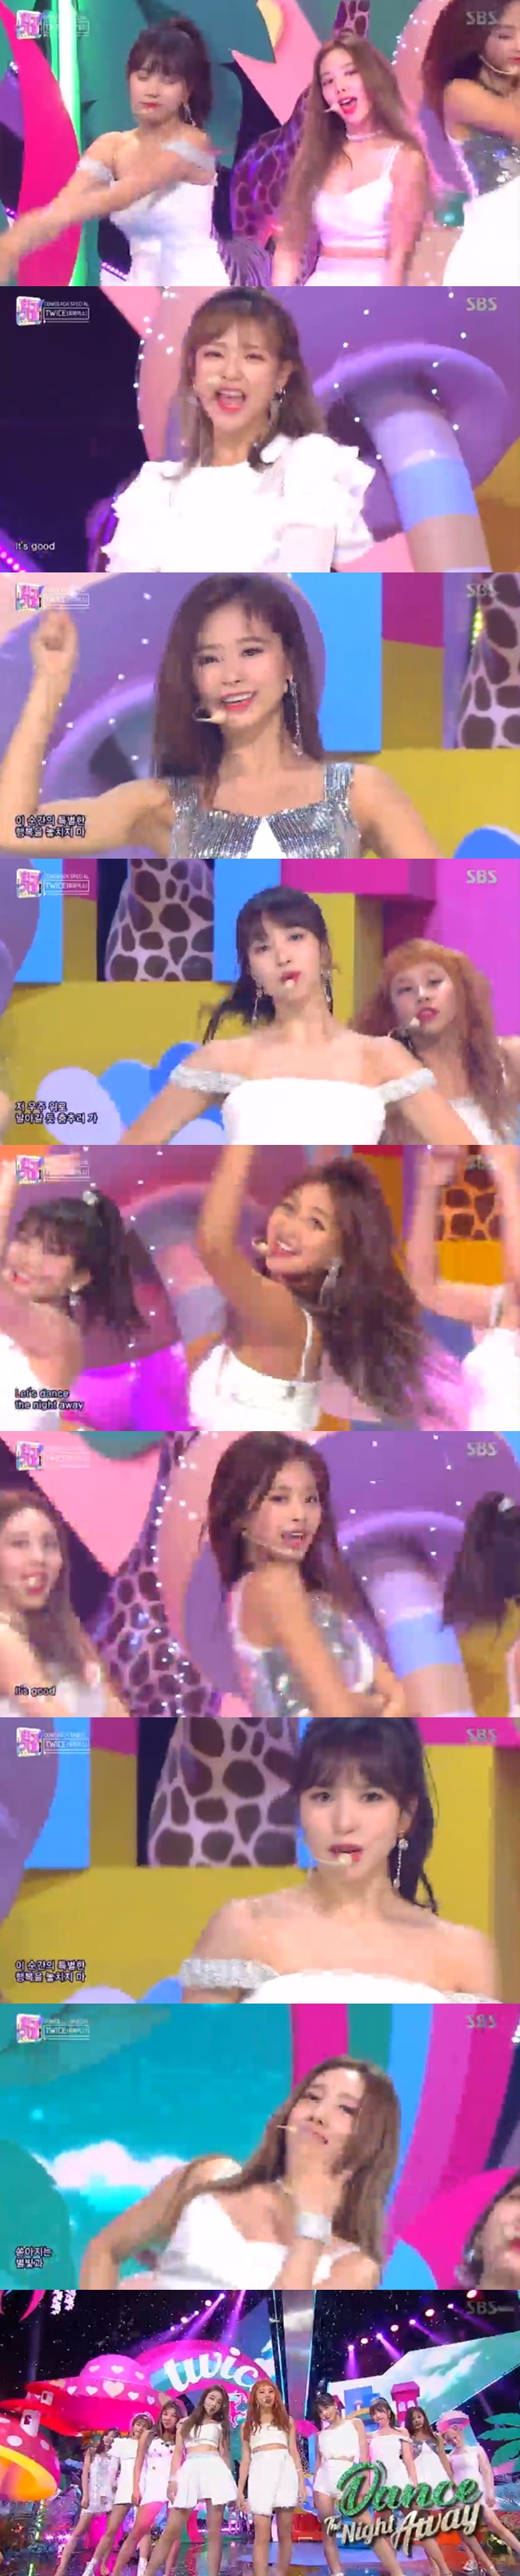 Apink is sweeping the top of the music network.On July 15, SBS Inkigayo, Apink No 1, red adolescent Travel and Momorand BAAM clashed for the first trophy.The tally showed that this weeks number one spot went to Apink.Thank you to the Plan A Entertainment family, said Apink Lantern. Thank you fans, Namju added.On the other hand, TWICE, which was the first summer activity after debut, made a comeback and showed off the summer queen aspect.TWICE revealed its bright and healthy energy through its new song Dance the Night Away.Girl group Gugudan member cleaning, Mina and Na Young also made a comeback with the newly formed Gugudan Seminar aimed at summer.The new song Samina is a dance song that reinterprets the Blues genre in a modern way. It has a unique vocal line and singing ability.Jessie and Basti, MyTin, Shin Hyun Hee and Kim Rutts comeback stage were also introduced.Jessie has made the atmosphere feel good with her new song Down, which features unique soul-filled vocals and rap.pear hyo-ju